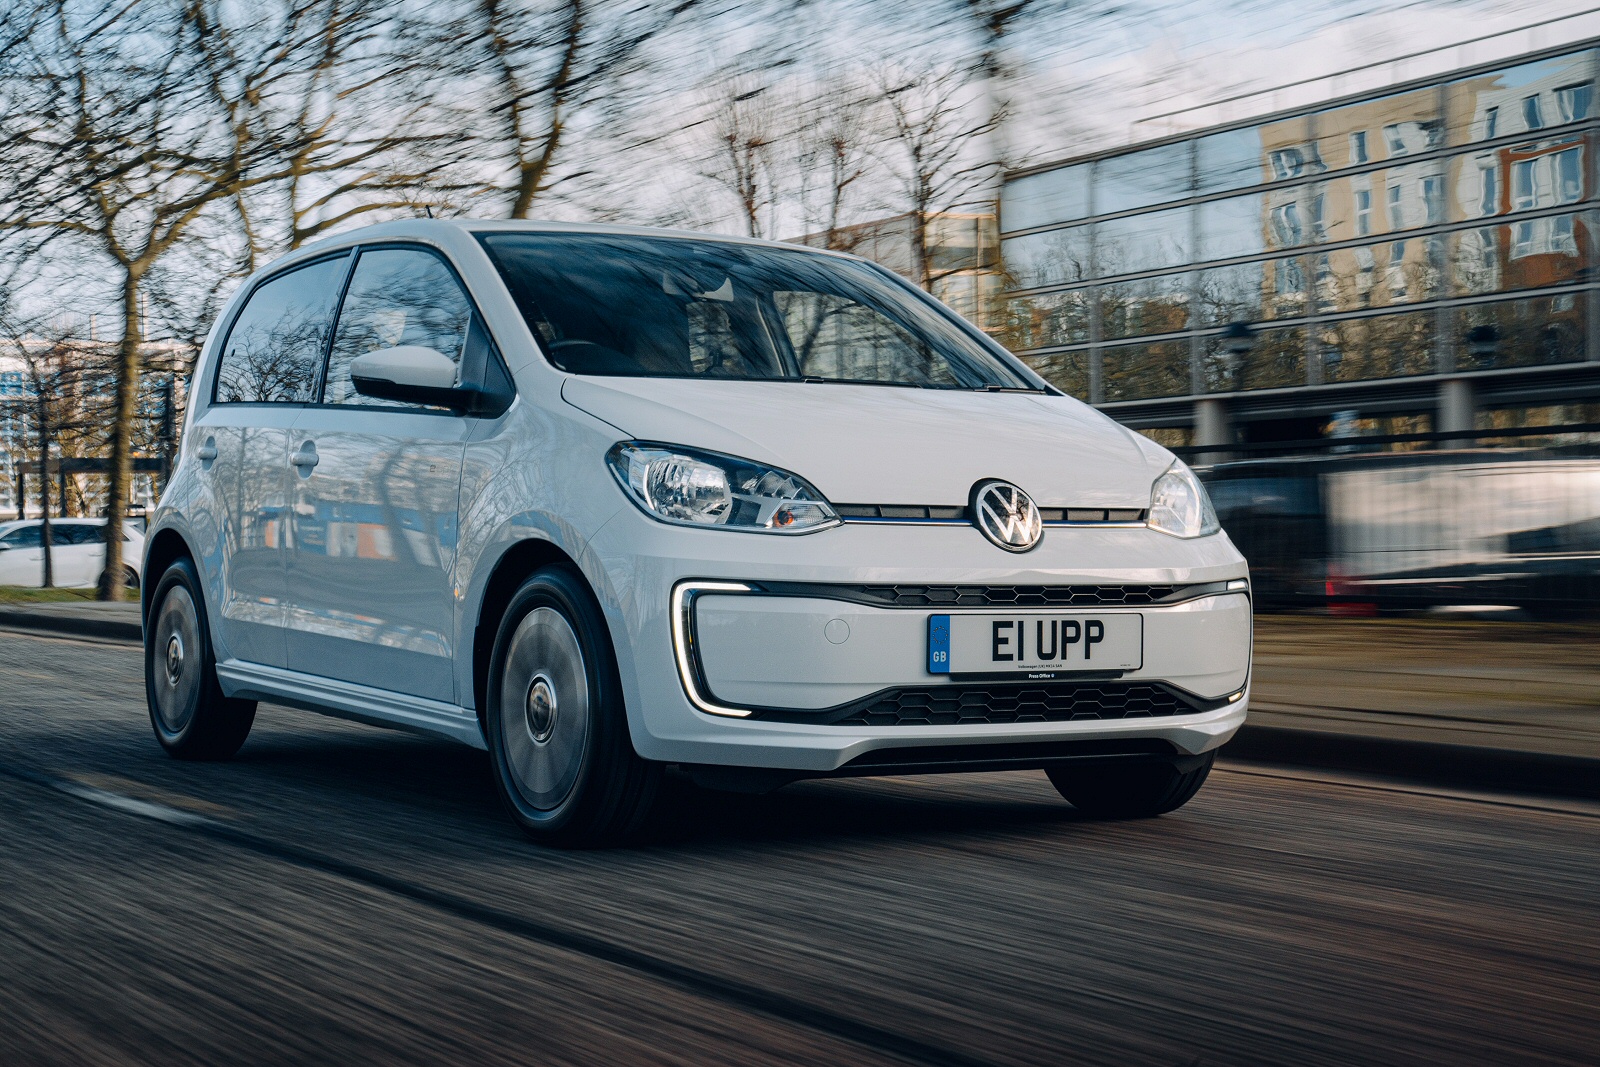 VOLKSWAGEN UP ELECTRIC HATCHBACK 60kW E-Up 32kWh 5dr Auto